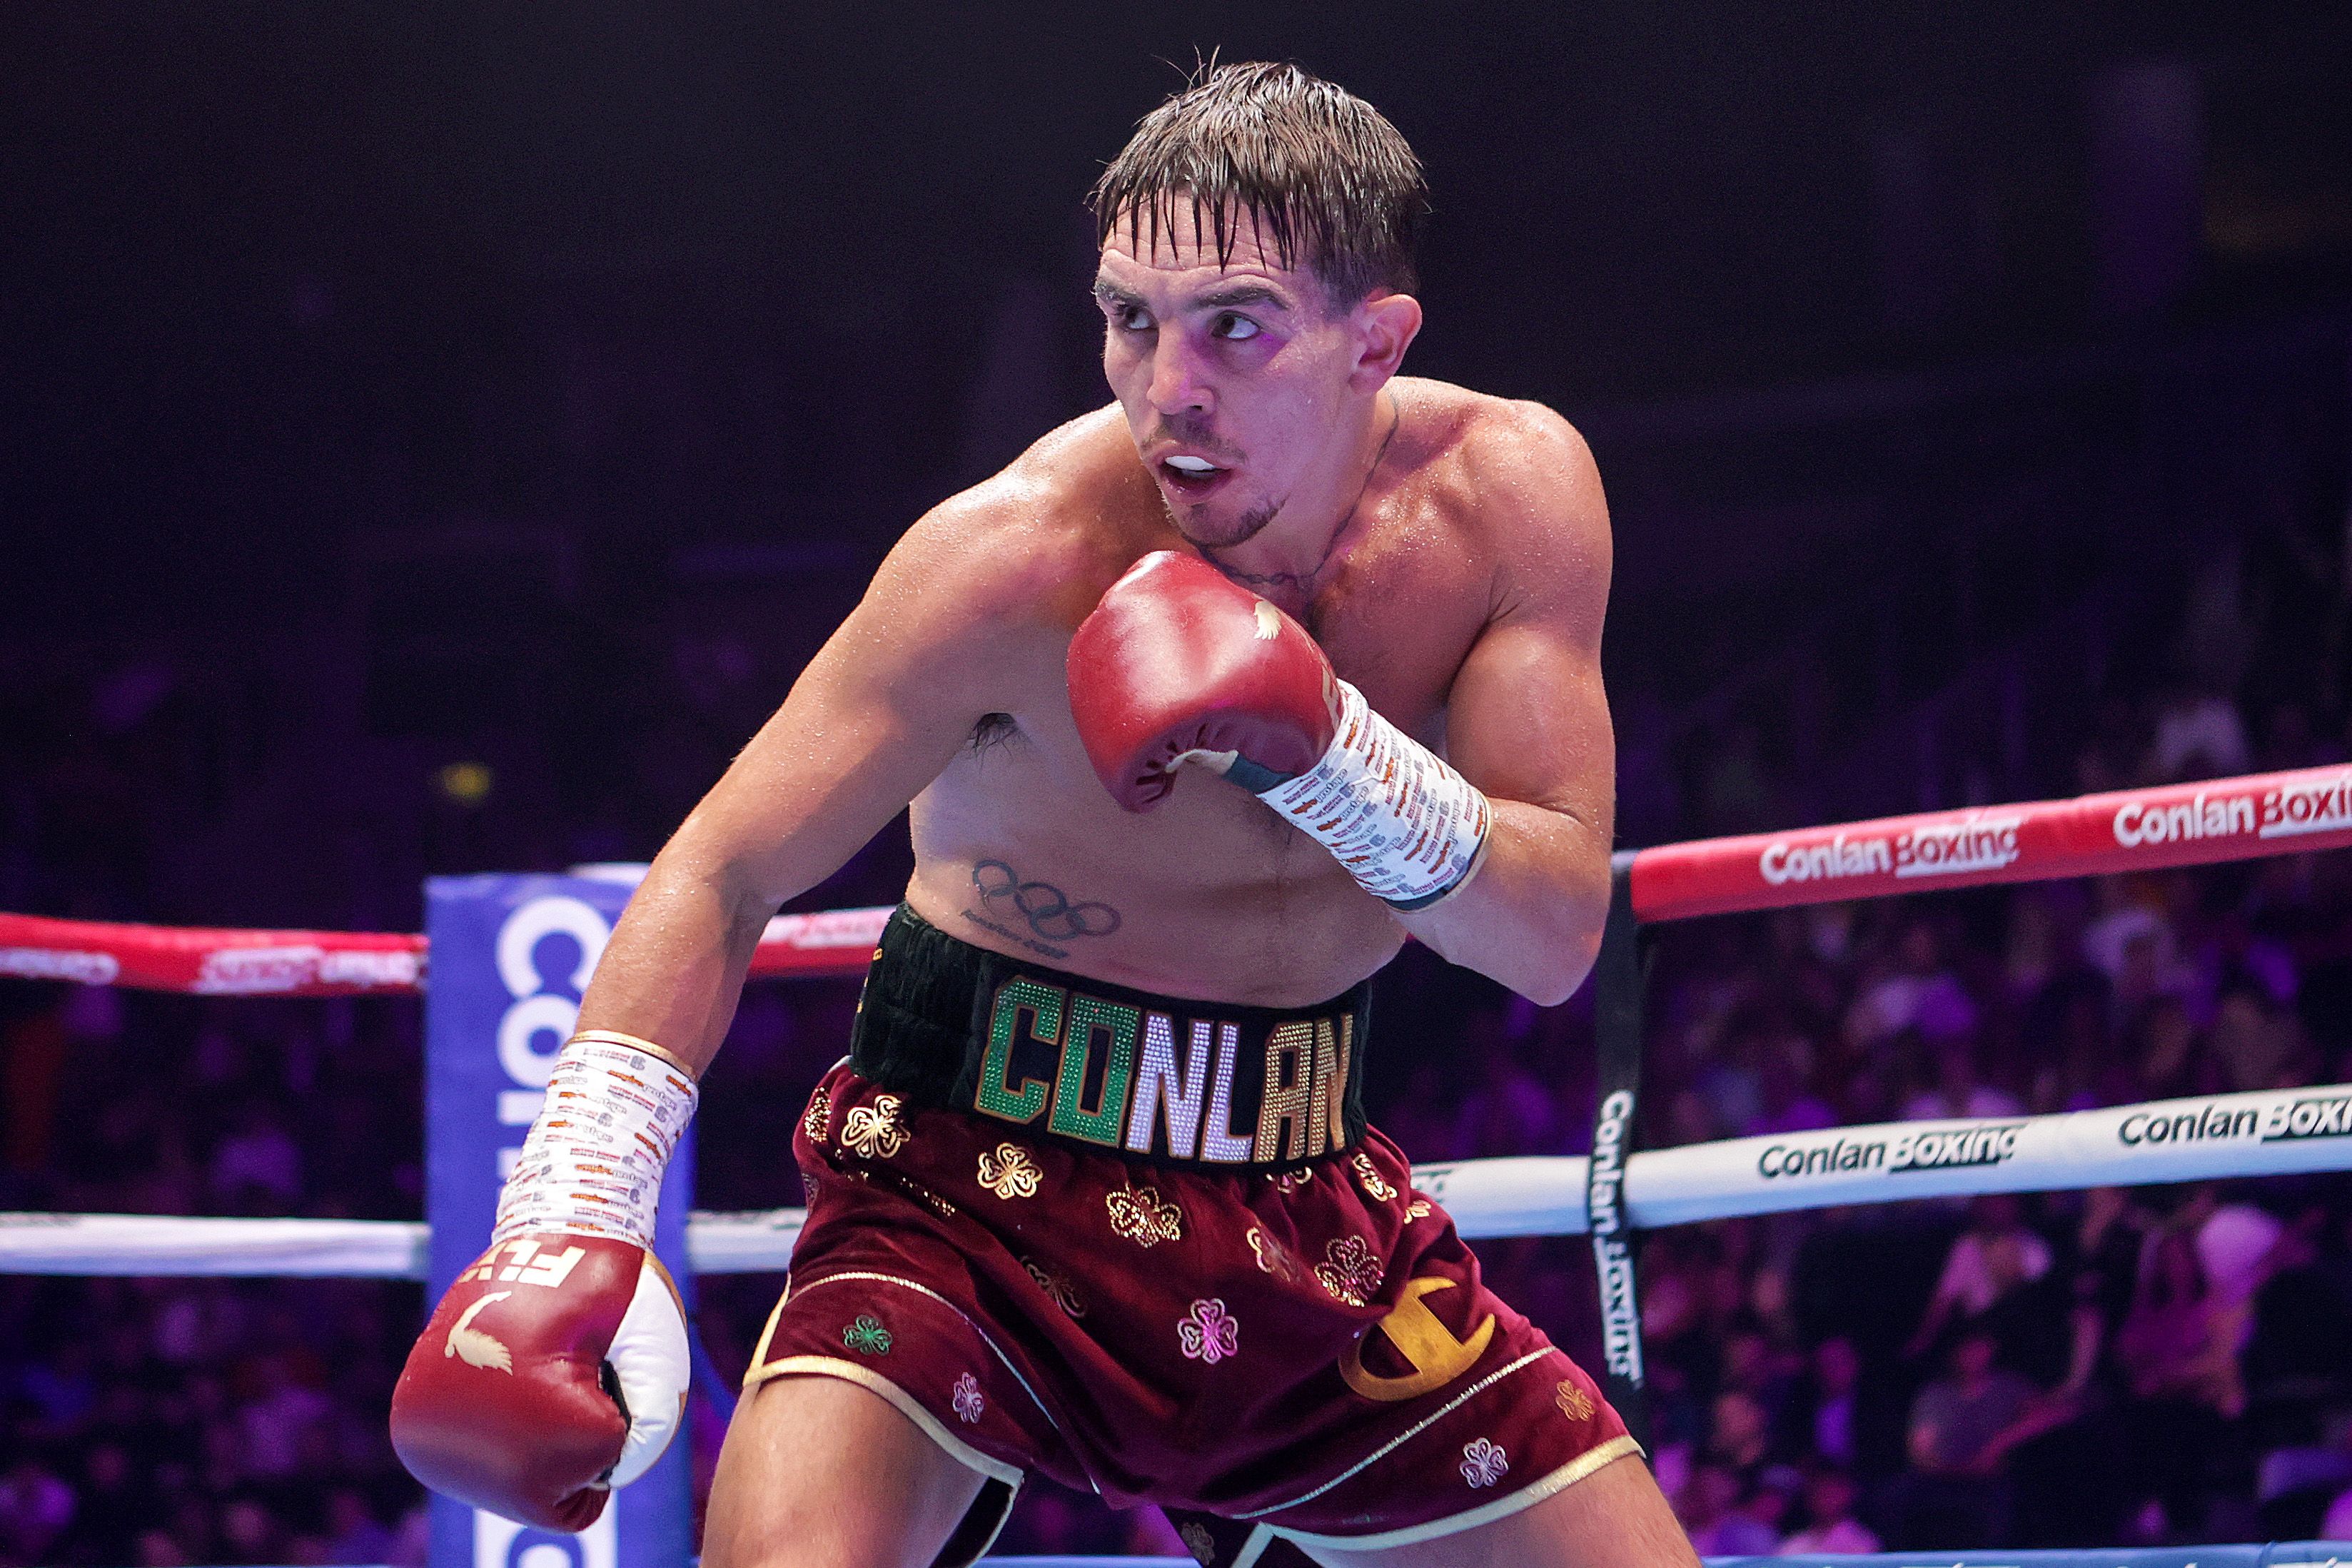 Michael Conlan believes lessons learnt in his defeat to Leigh Wood last year will help him over the line on Saturday